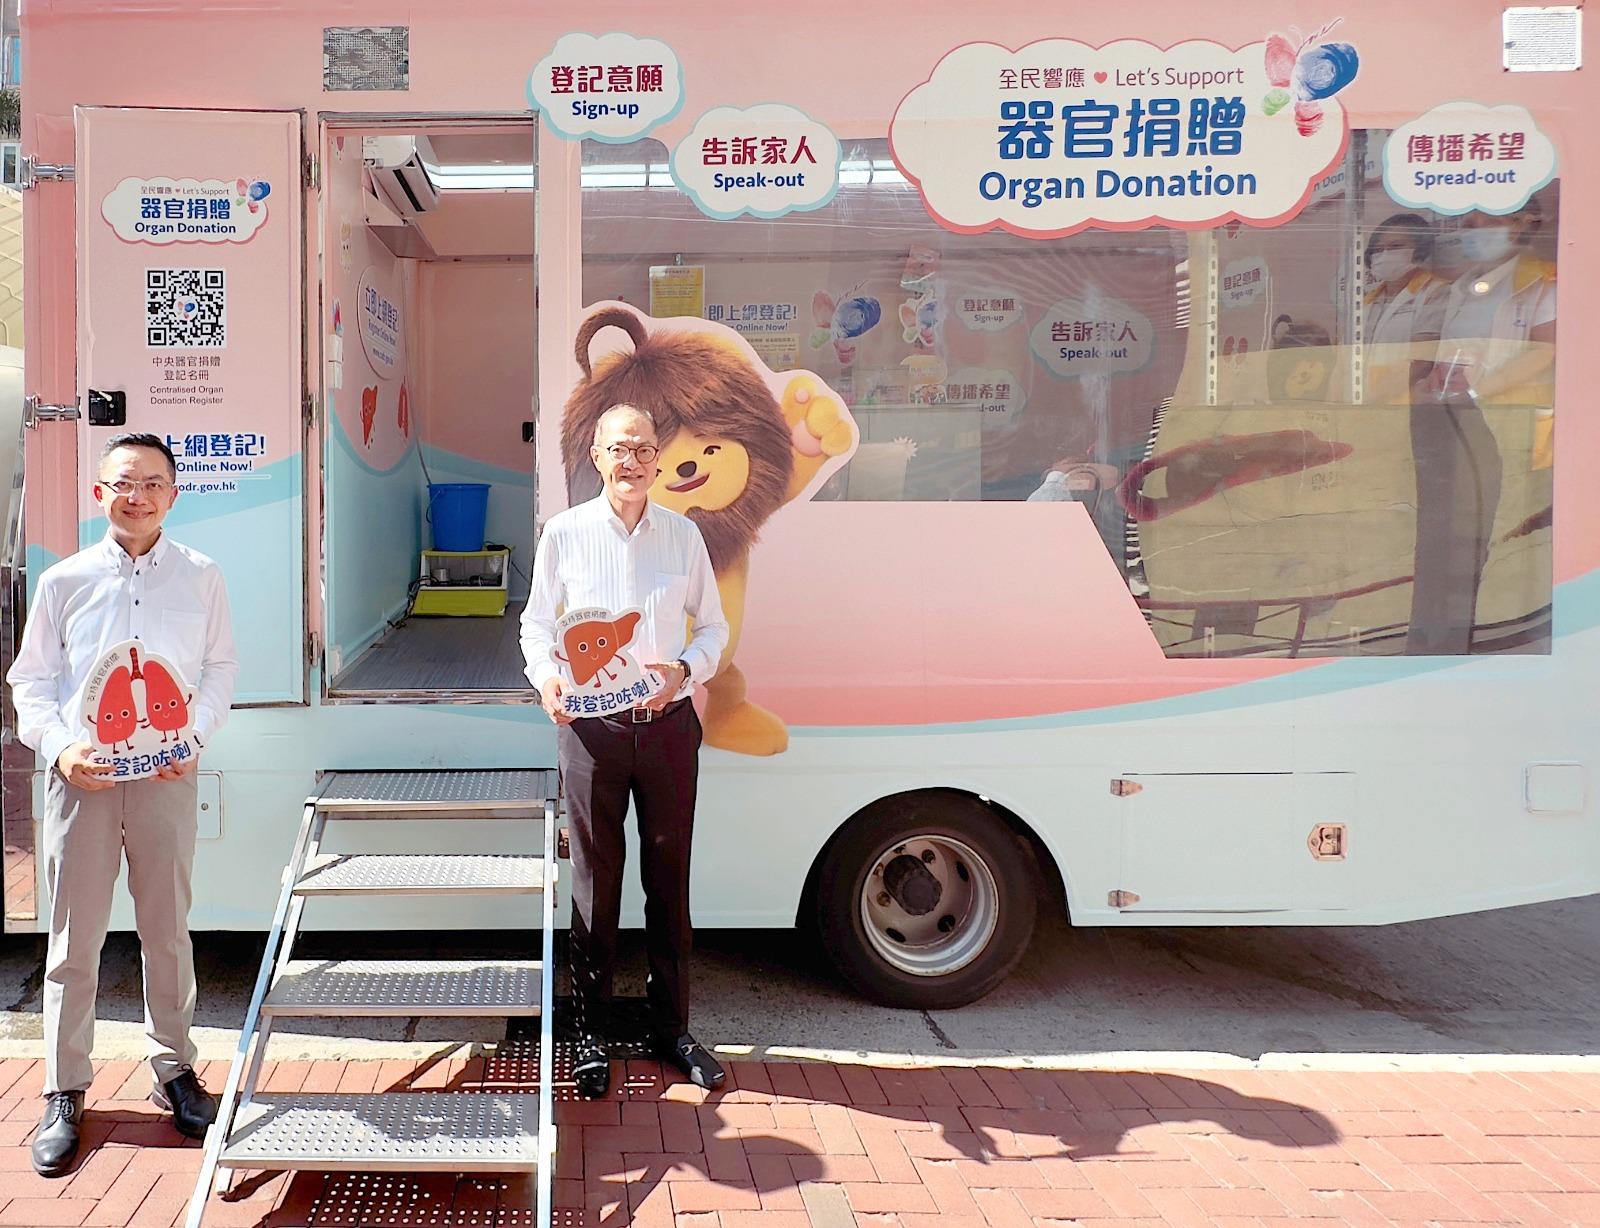 The Department of Health today (August 16) launched the organ donation promotion vehicle. The organ donation promotion vehicle was parked at Hennessy Road, Wan Chai, on the first day of its launch. Photo shows the Secretary for Health, Professor Lo Chung-mau (right), and the Director of Health, Dr Ronald Lam (left), visiting and showing support to the staff on site.
